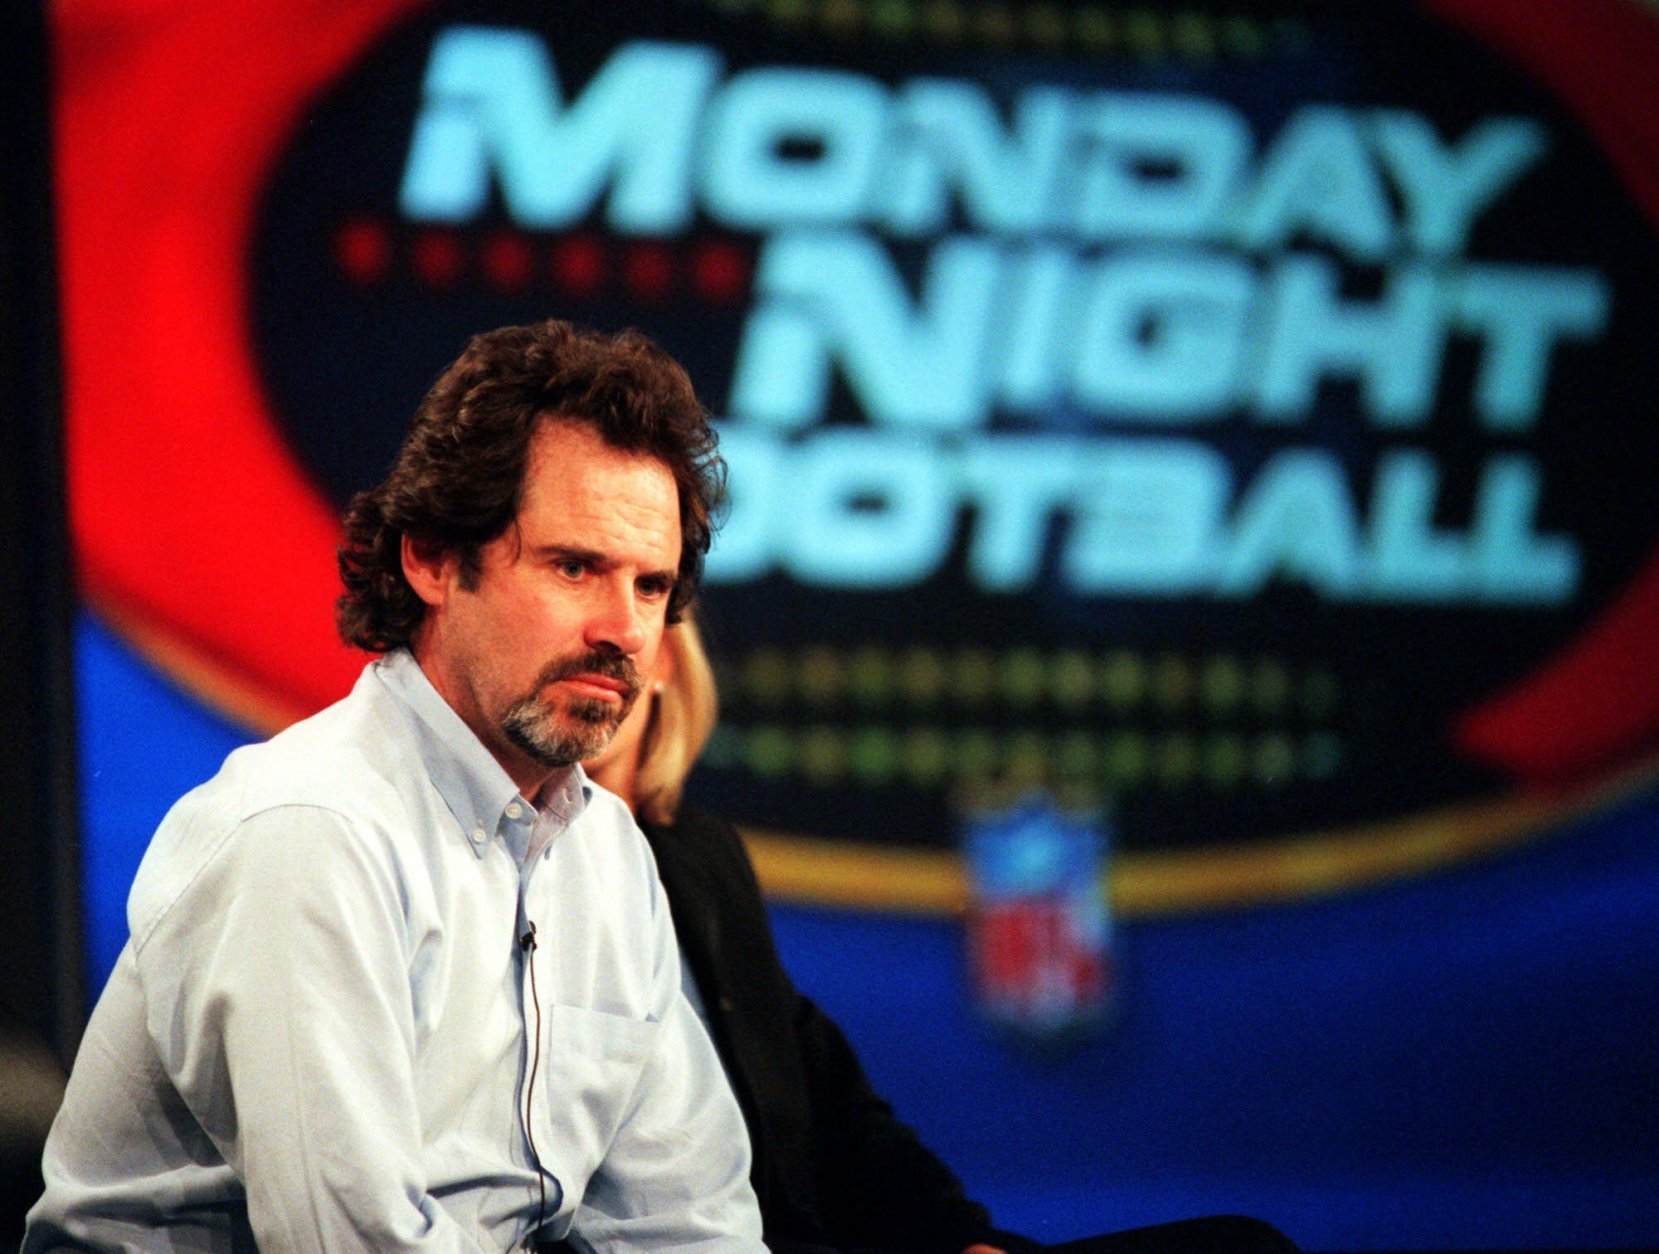 Comedian Dennis Miller, a new addition to the announcing team of ABC's "Monday Night Football," considers a reporter's question during a news conference at the ABC 2000 Summer Press Tour in Pasadena, Calif., Sunday, July 16, 2000. (AP Photo/Chris Pizzello)